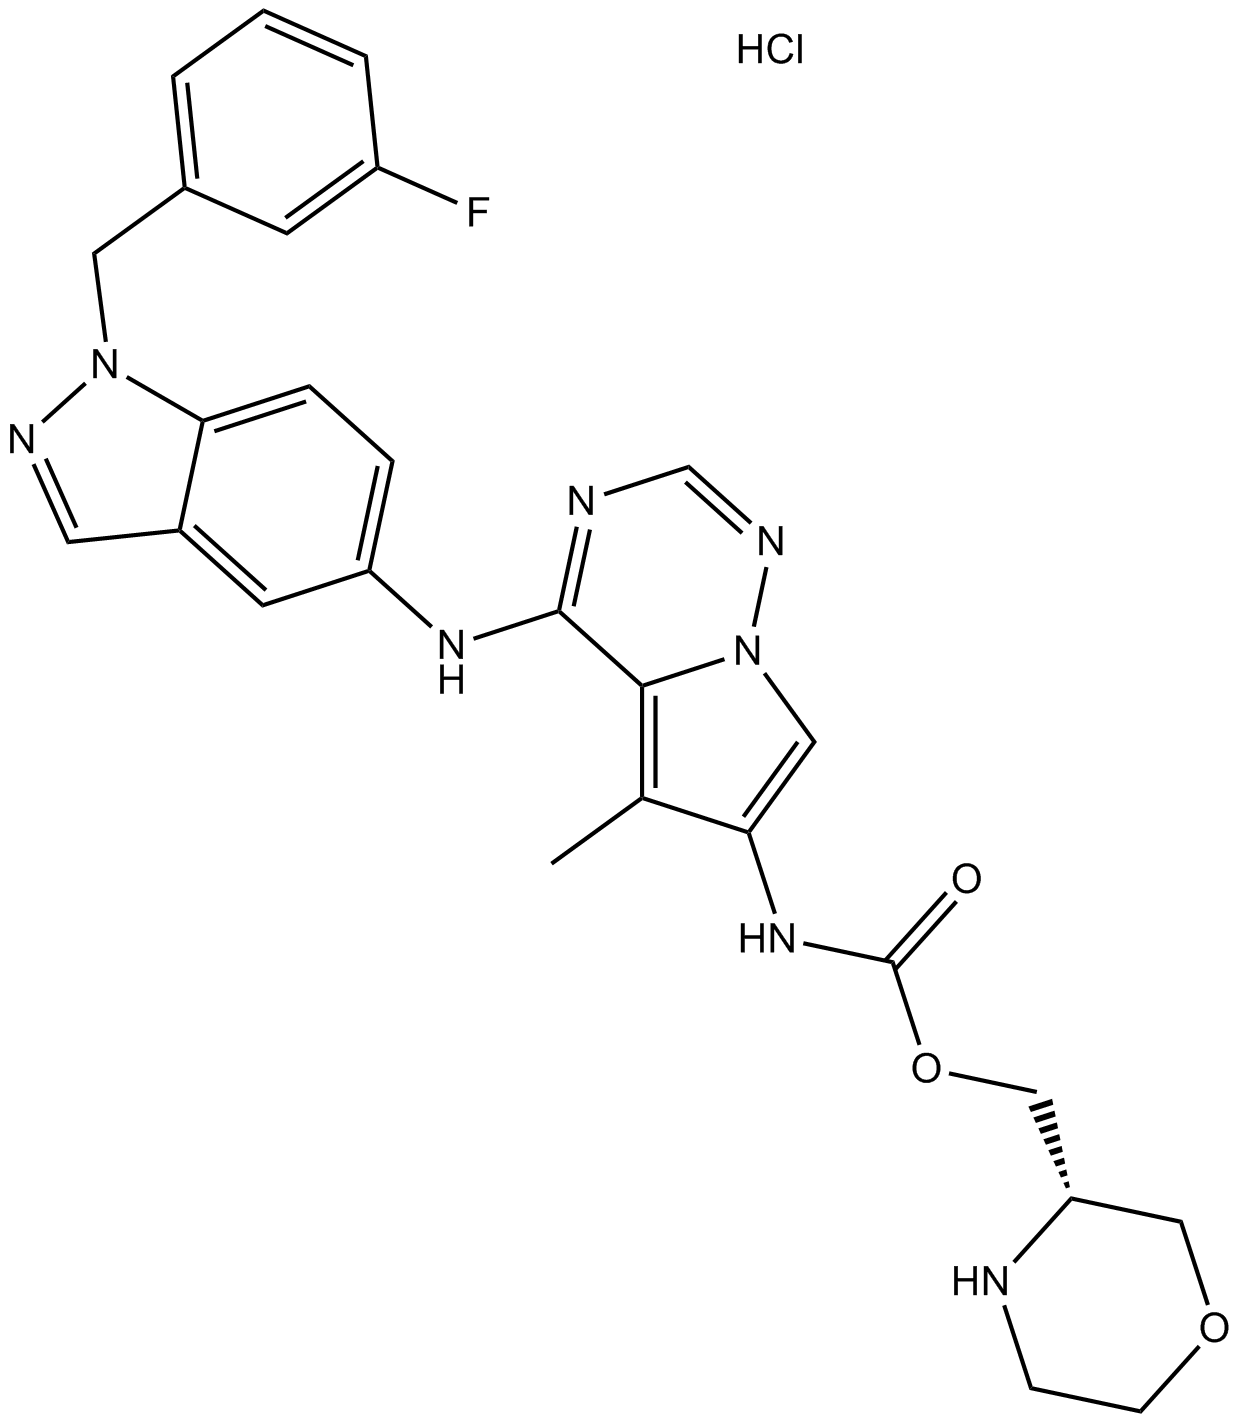 BMS-599626 Hydrochloride  Chemical Structure